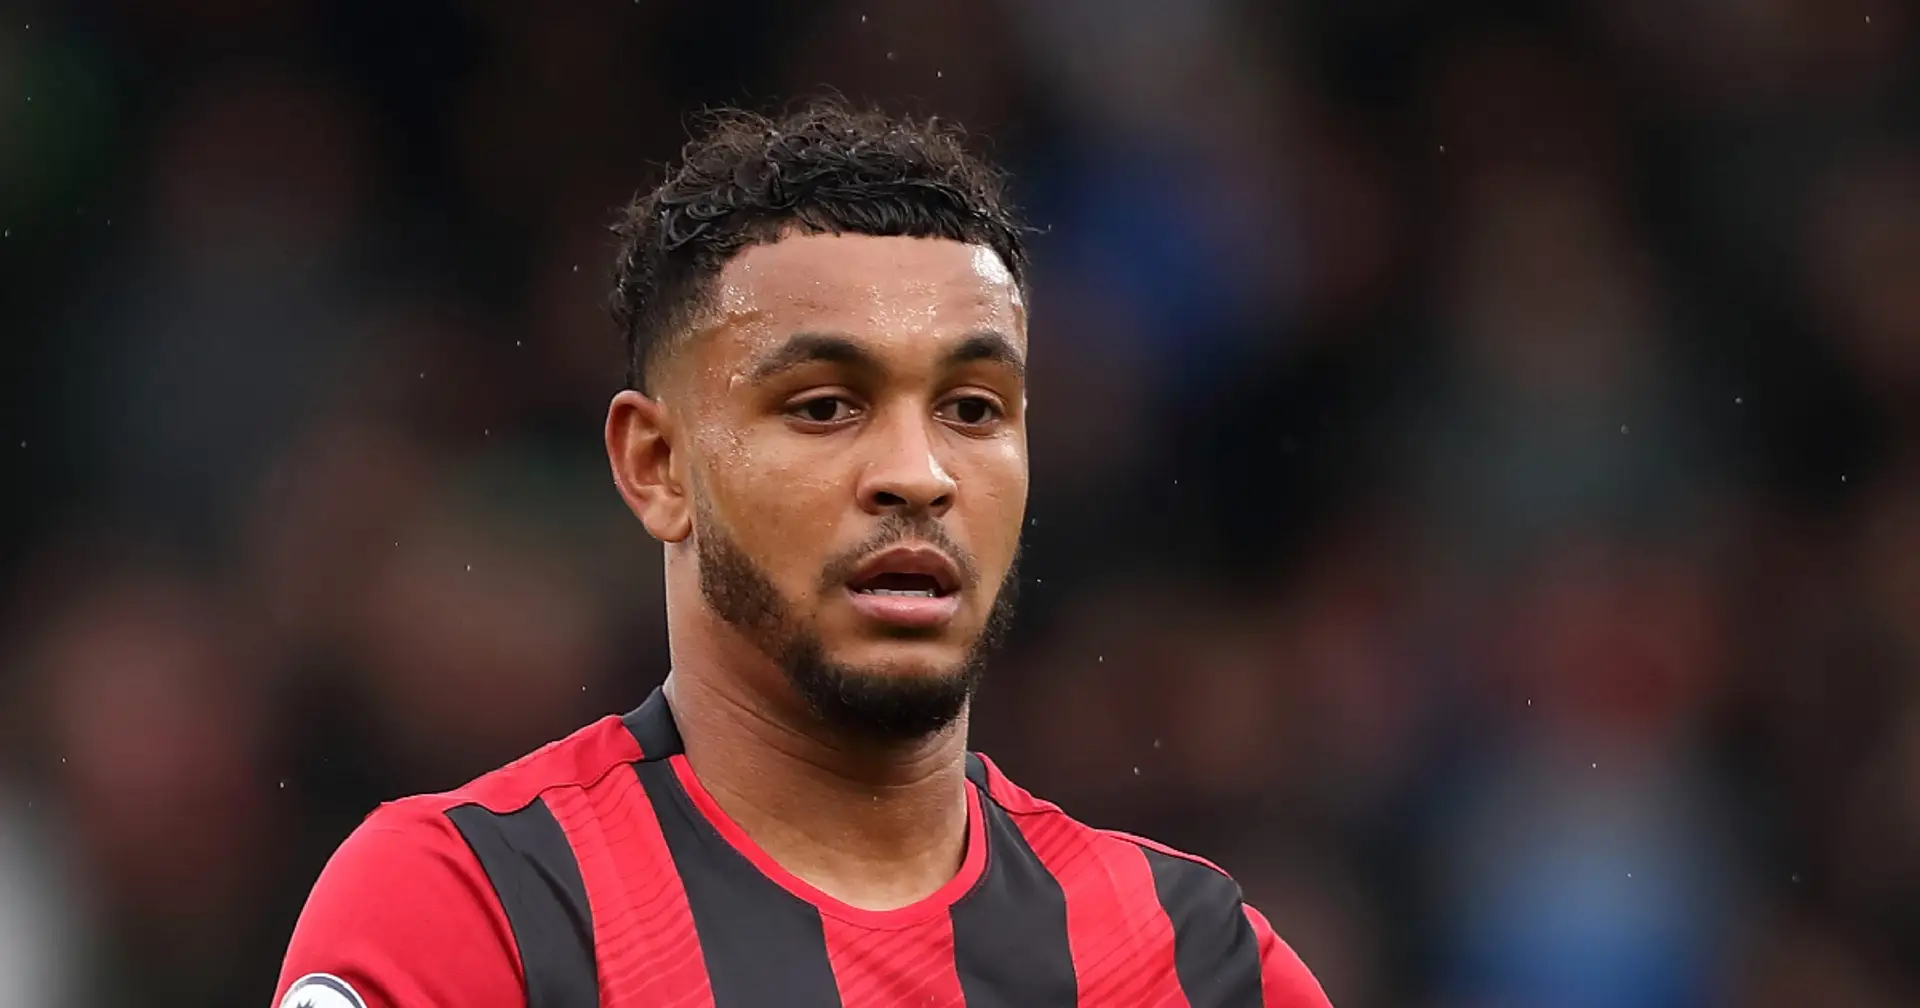 'The link is strong': Man United tipped to sign Josh King